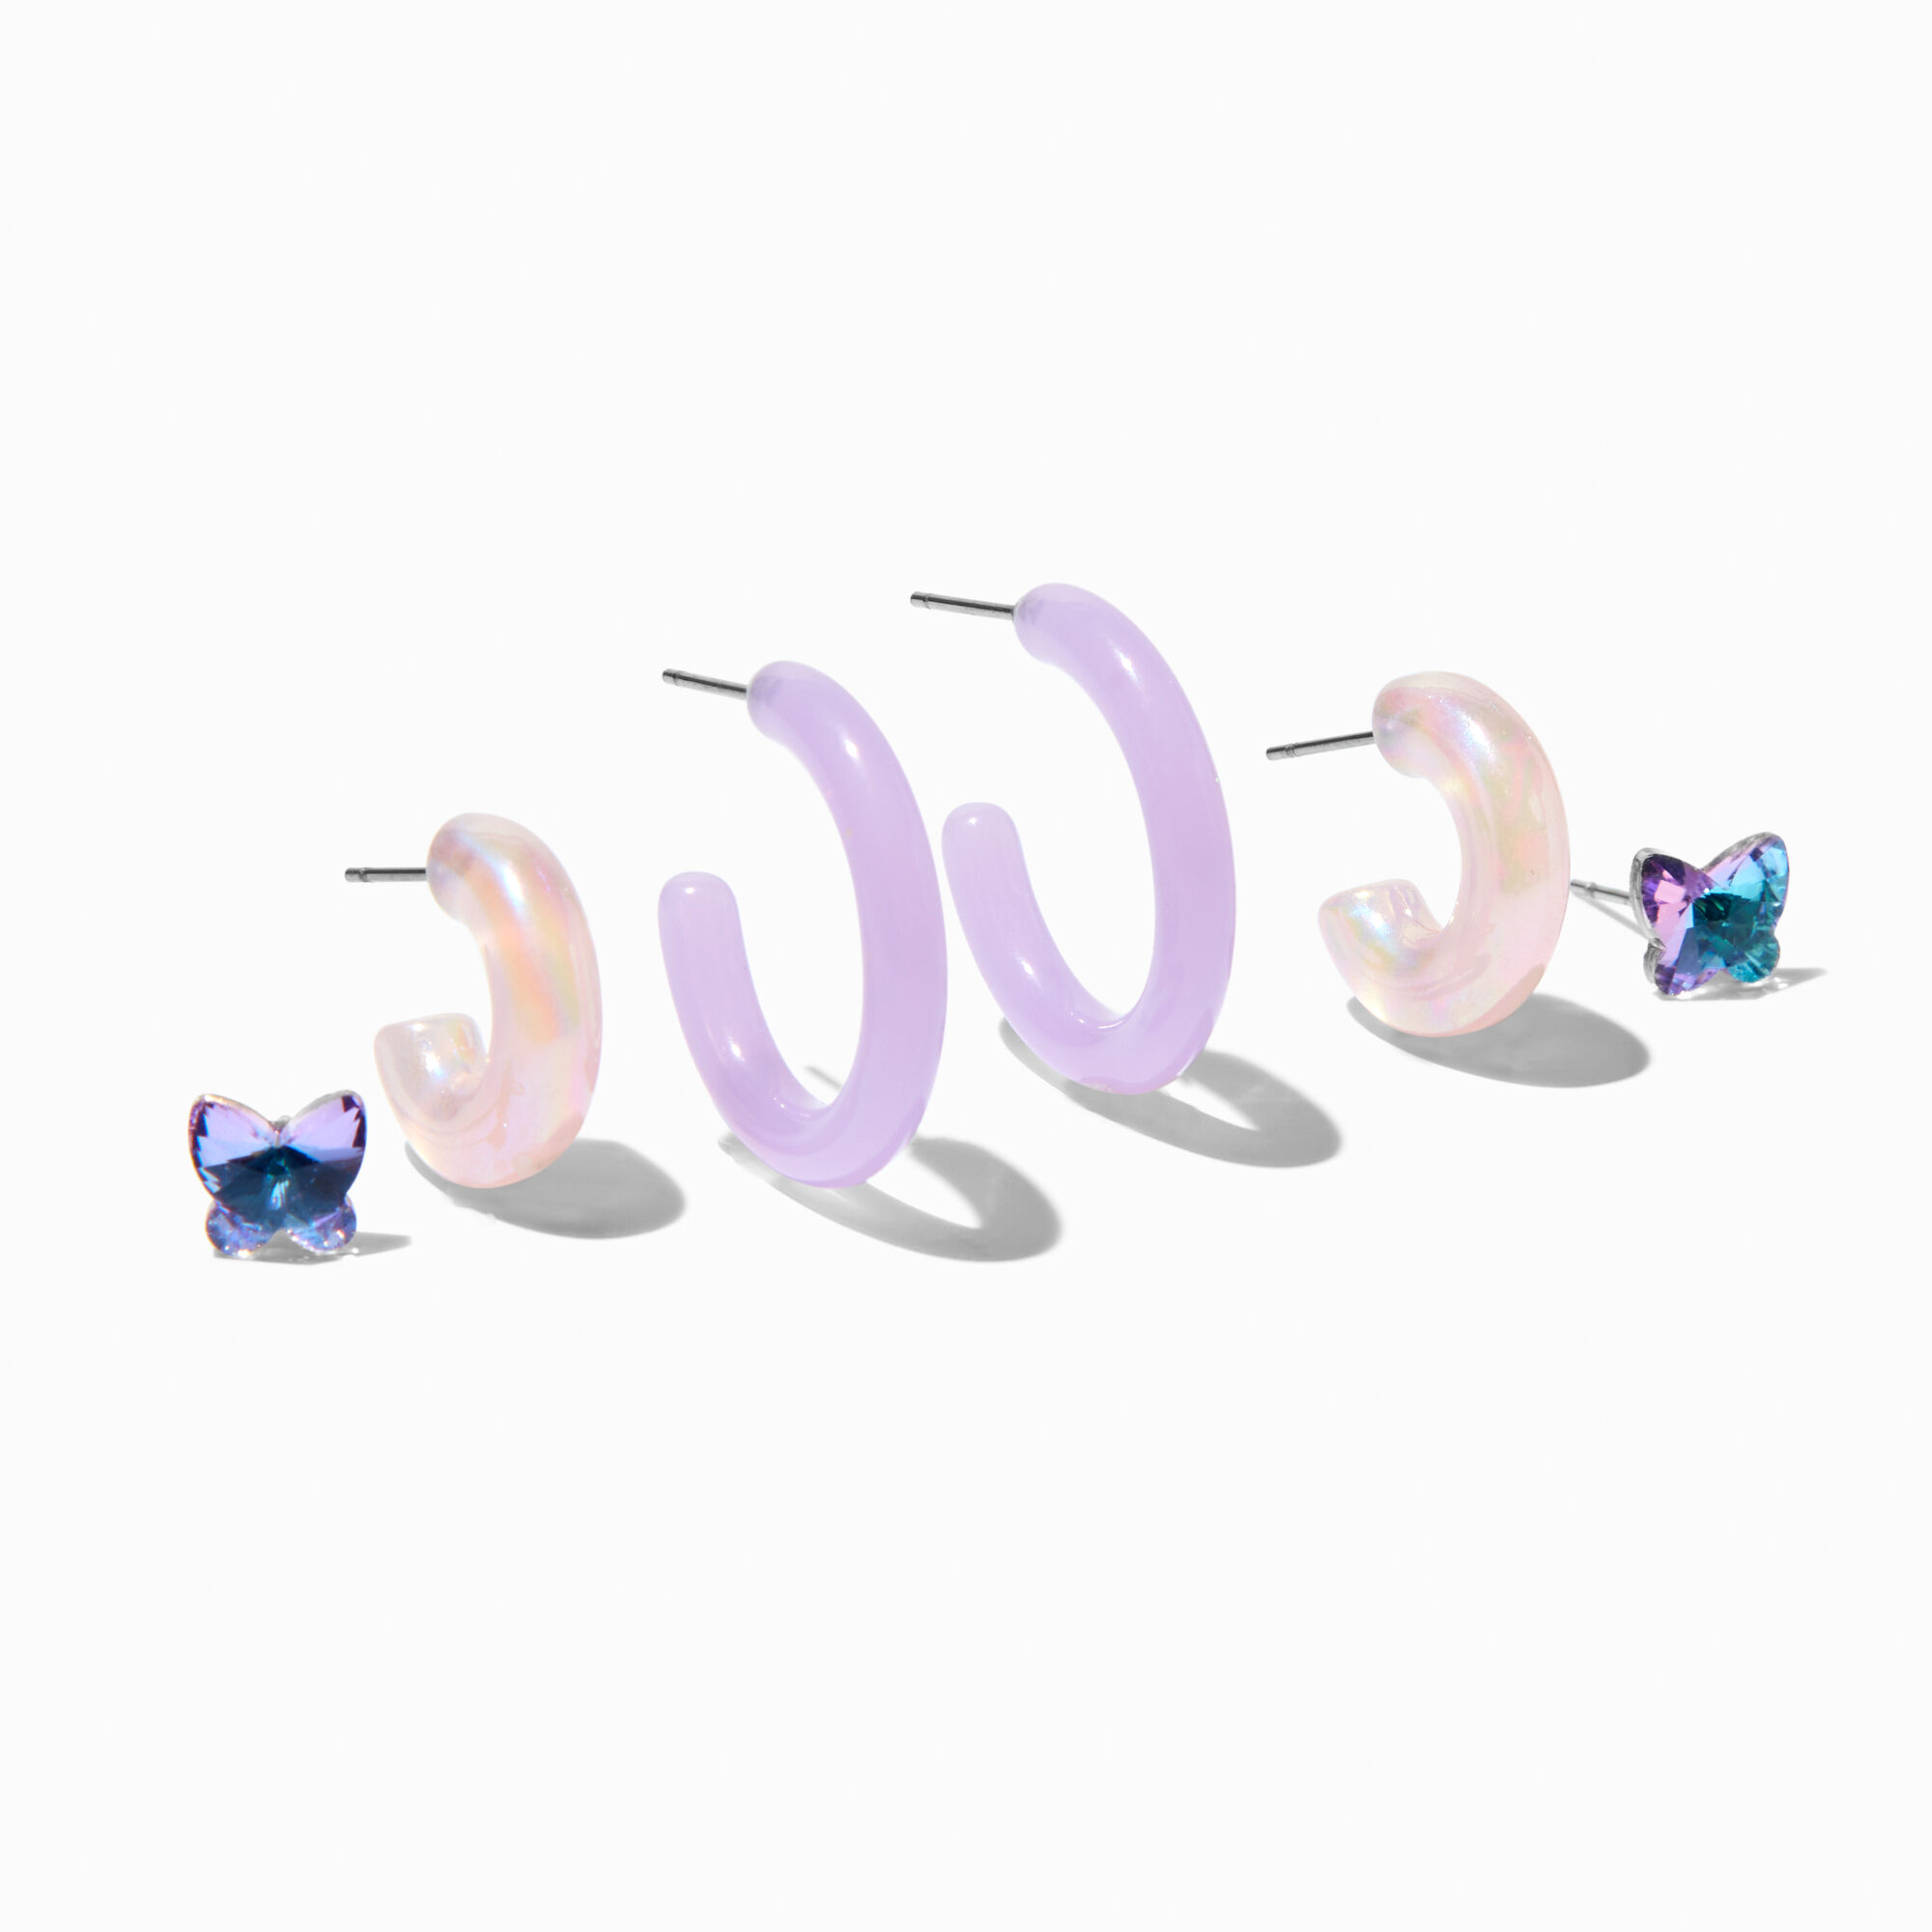 View Claires Hoops Earring Stackables Set 3 Pack Purple information